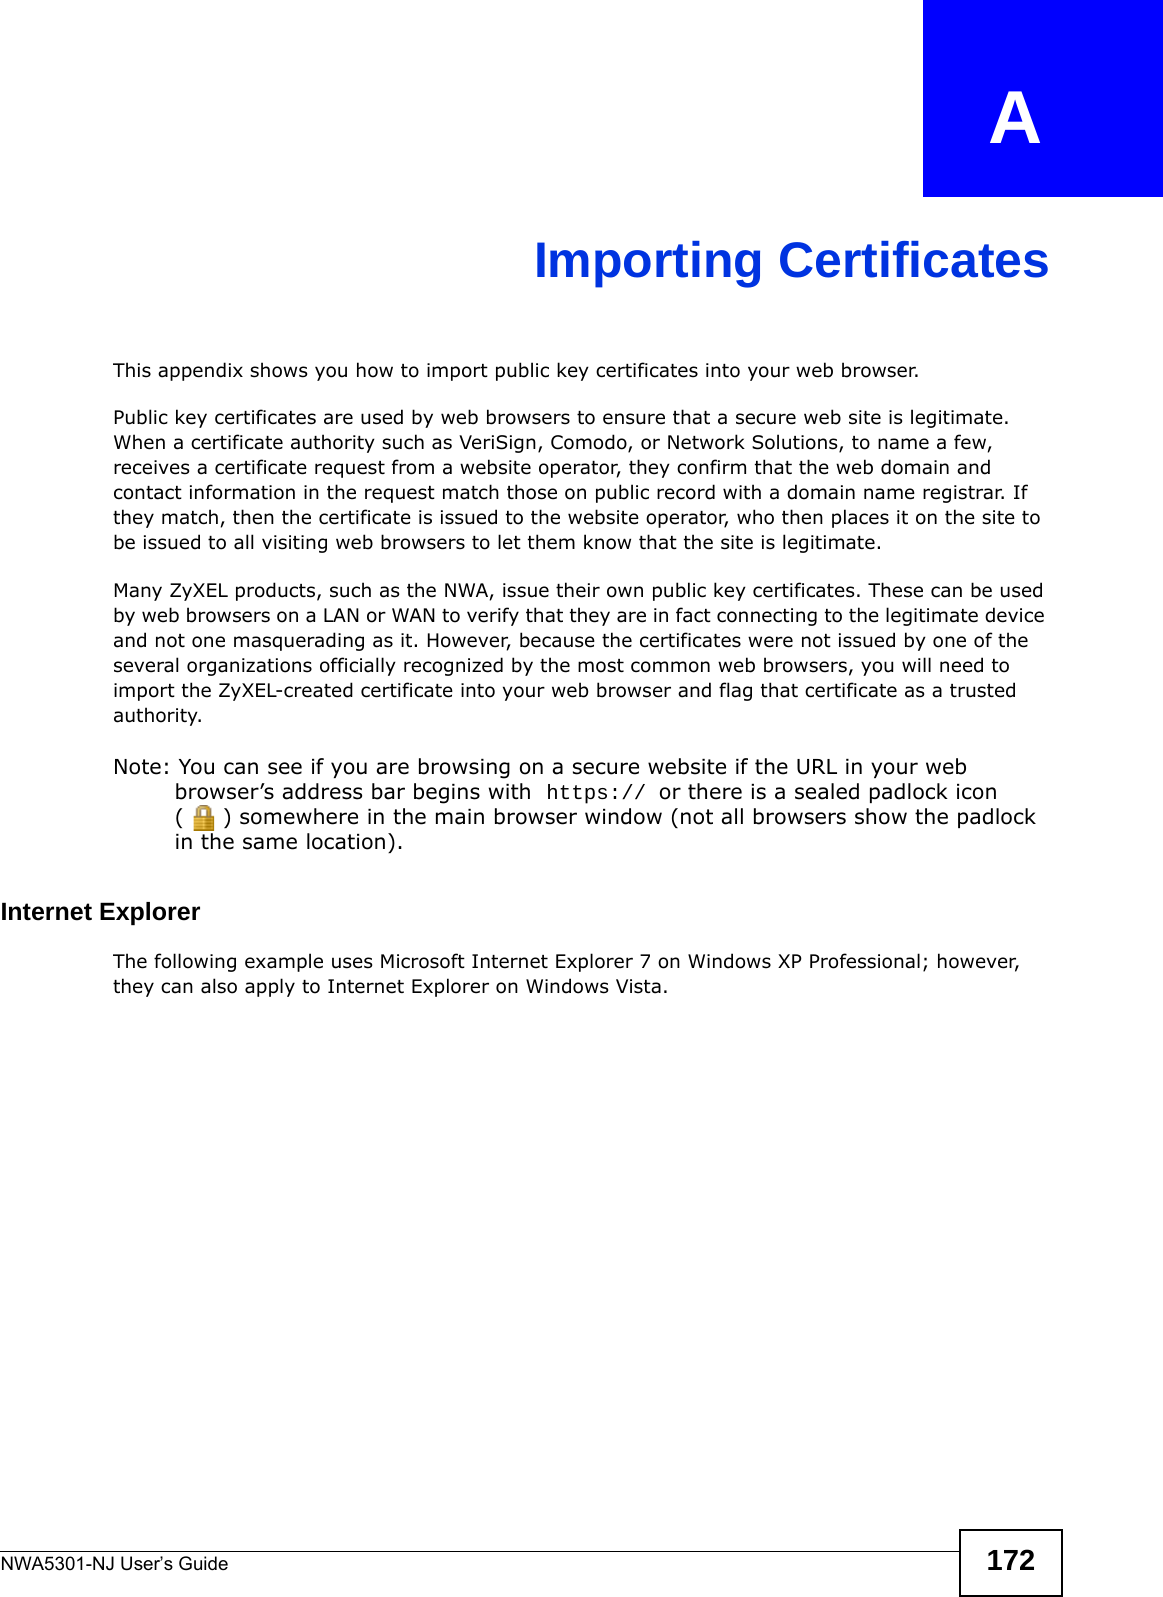 NWA5301-NJ User’s Guide 172APPENDIX   AImporting CertificatesThis appendix shows you how to import public key certificates into your web browser. Public key certificates are used by web browsers to ensure that a secure web site is legitimate. When a certificate authority such as VeriSign, Comodo, or Network Solutions, to name a few, receives a certificate request from a website operator, they confirm that the web domain and contact information in the request match those on public record with a domain name registrar. If they match, then the certificate is issued to the website operator, who then places it on the site to be issued to all visiting web browsers to let them know that the site is legitimate.Many ZyXEL products, such as the NWA, issue their own public key certificates. These can be used by web browsers on a LAN or WAN to verify that they are in fact connecting to the legitimate device and not one masquerading as it. However, because the certificates were not issued by one of the several organizations officially recognized by the most common web browsers, you will need to import the ZyXEL-created certificate into your web browser and flag that certificate as a trusted authority.Note: You can see if you are browsing on a secure website if the URL in your web browser’s address bar begins with  https:// or there is a sealed padlock icon ( ) somewhere in the main browser window (not all browsers show the padlock in the same location).Internet ExplorerThe following example uses Microsoft Internet Explorer 7 on Windows XP Professional; however, they can also apply to Internet Explorer on Windows Vista.